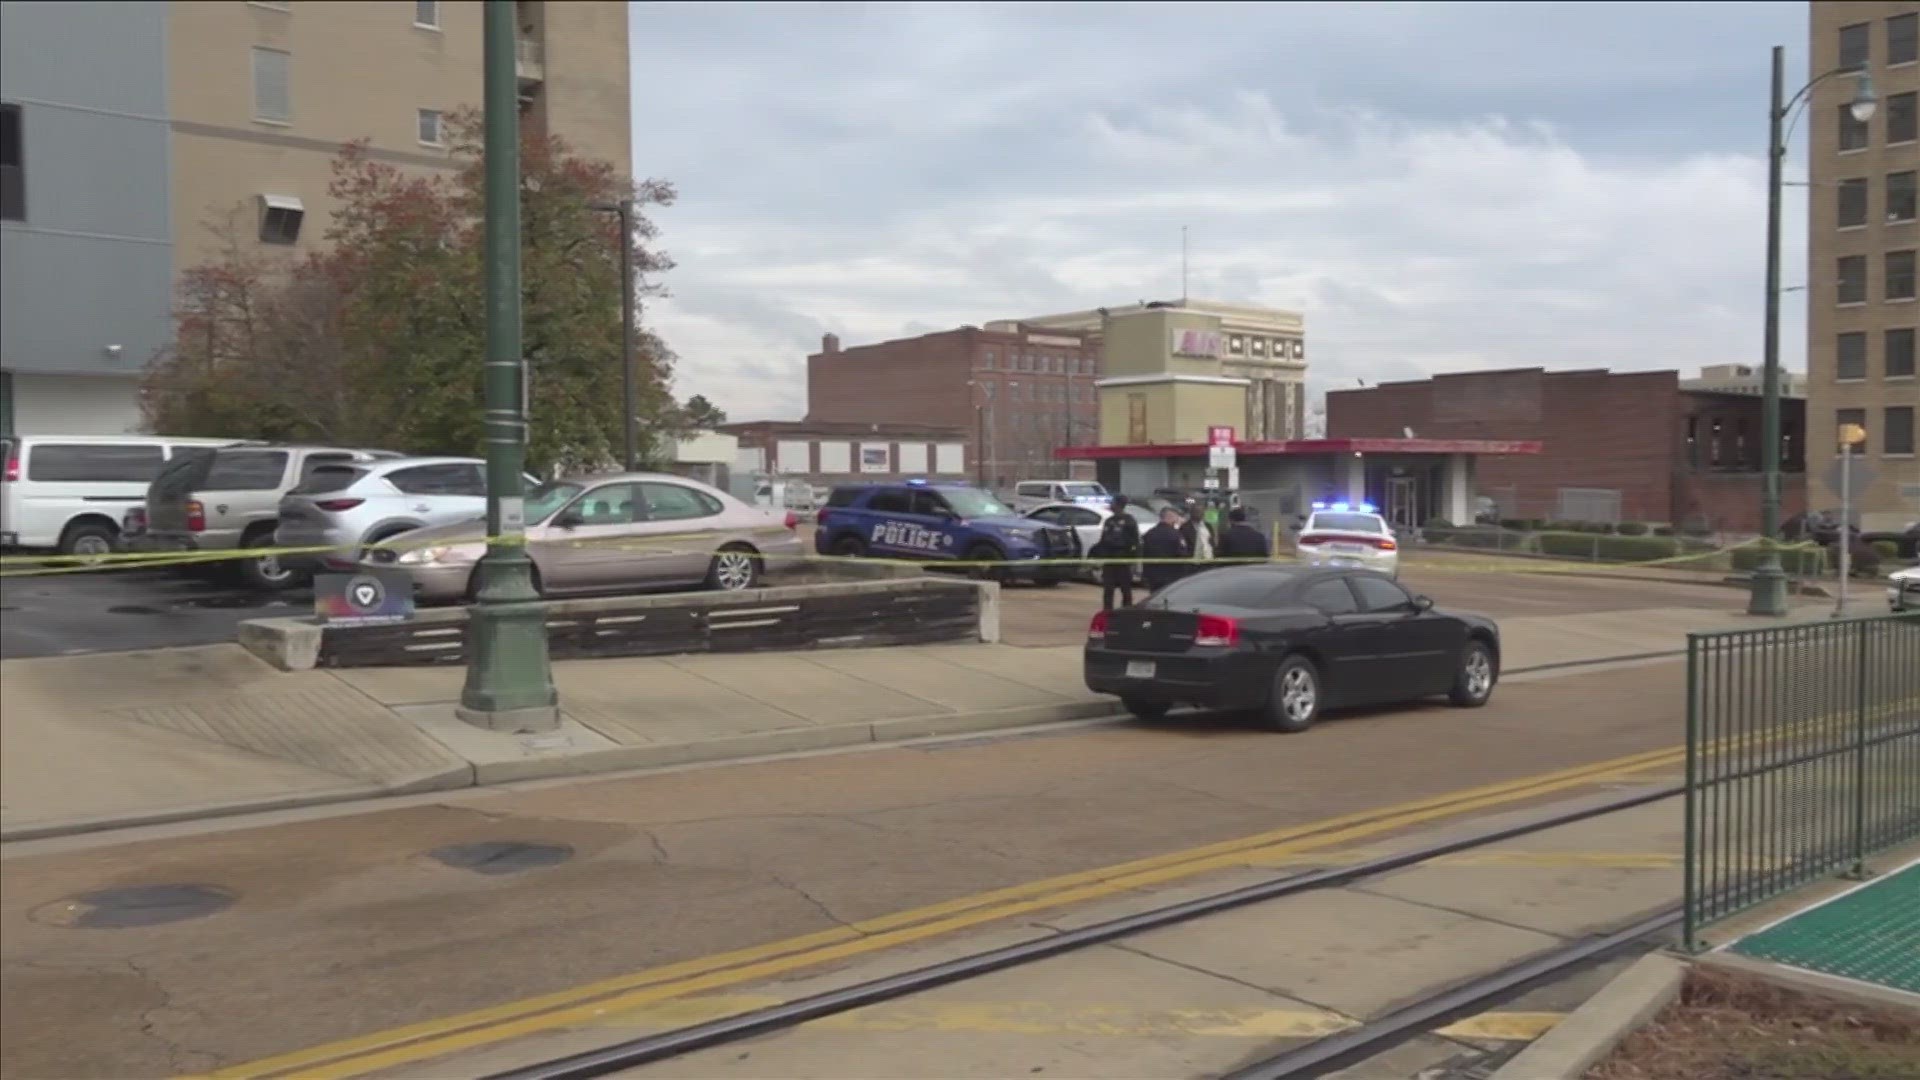 MPD officers responded to a shooting just before 1 p.m. Wednesday, in the 200 block of Madison Ave. near B.B. King Blvd., not far from AutoZone Park.